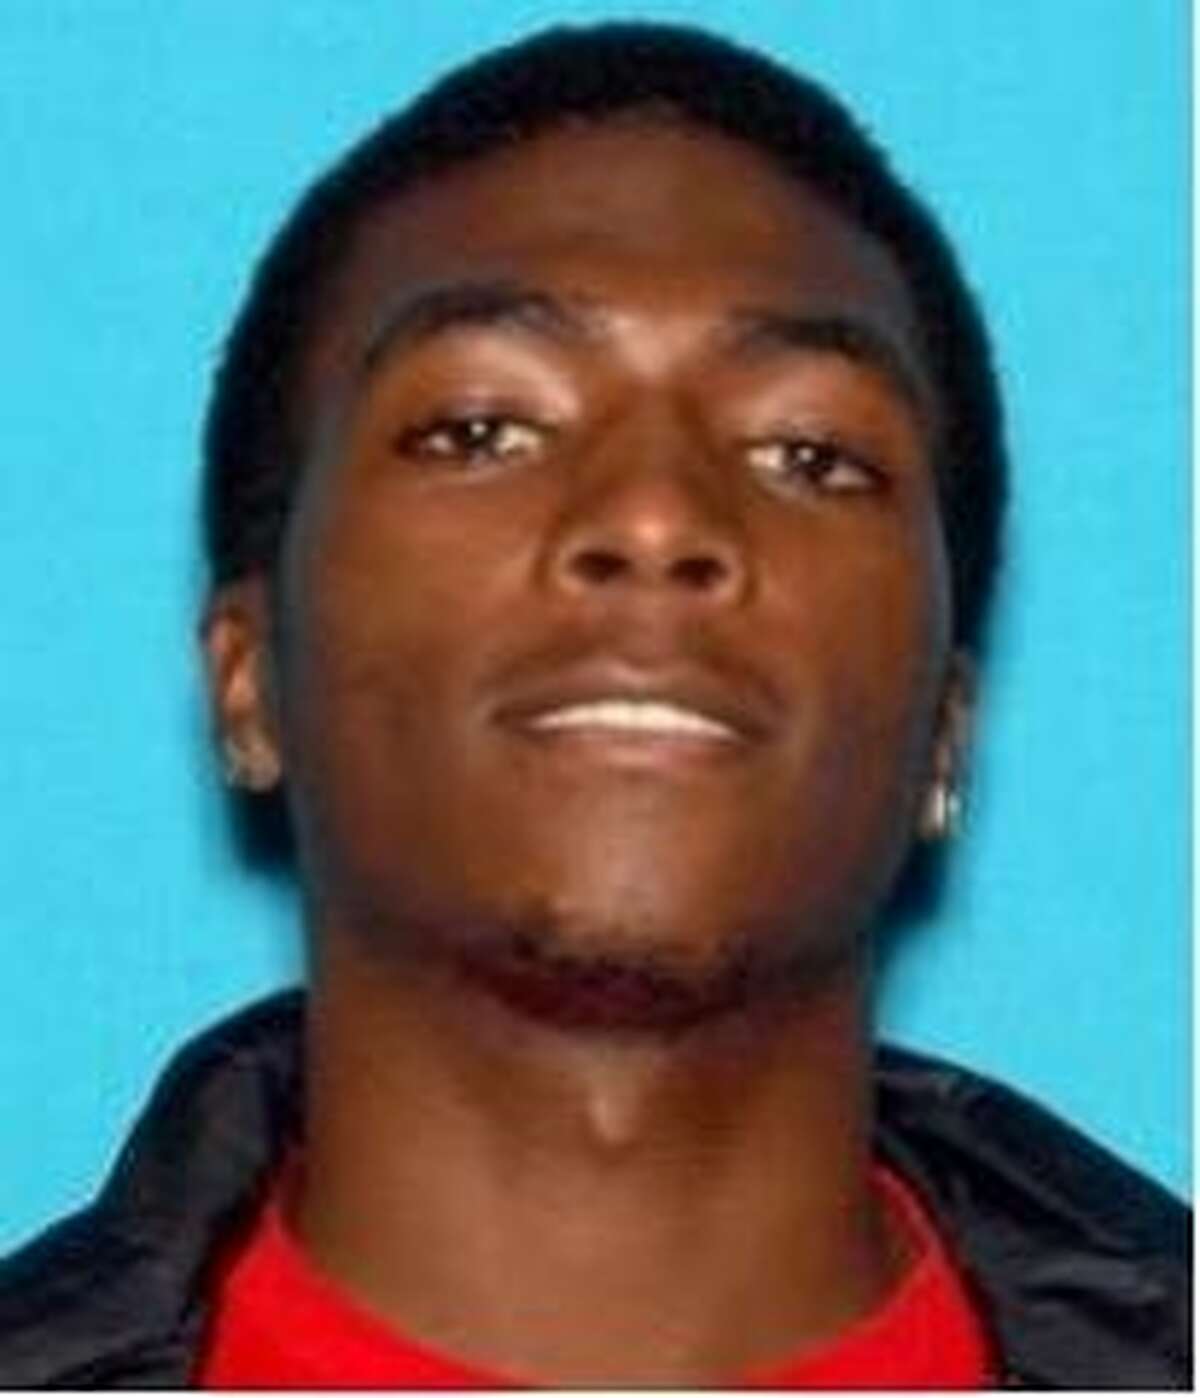 Cervando Jessie Sterling-Valdez, 22, identified as the man who opened fire on the busy streets of downtown Oakland Tuesday, injuring a woman.